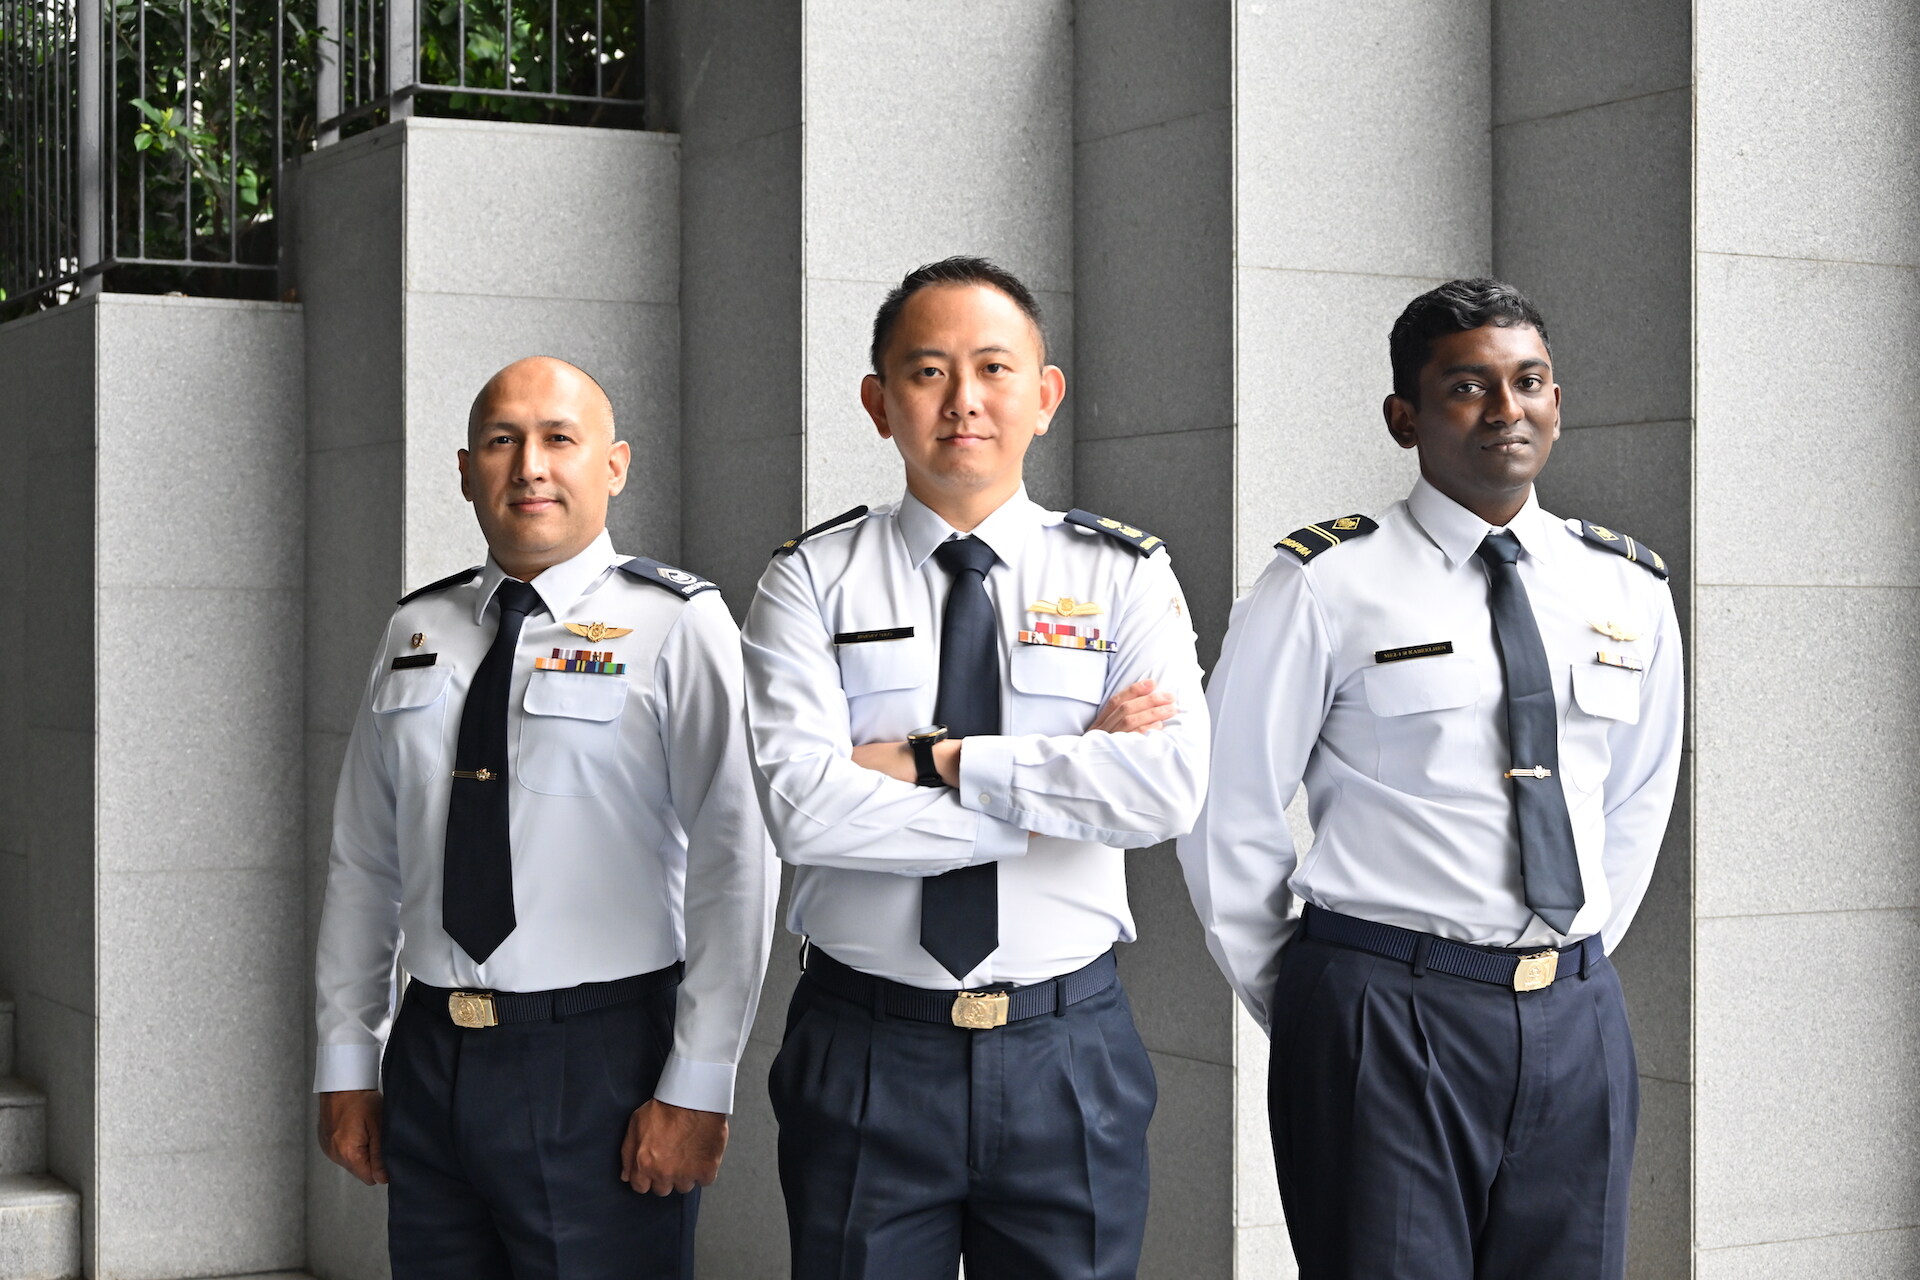 SAF personnel recognised for supporting Australia flood relief operations